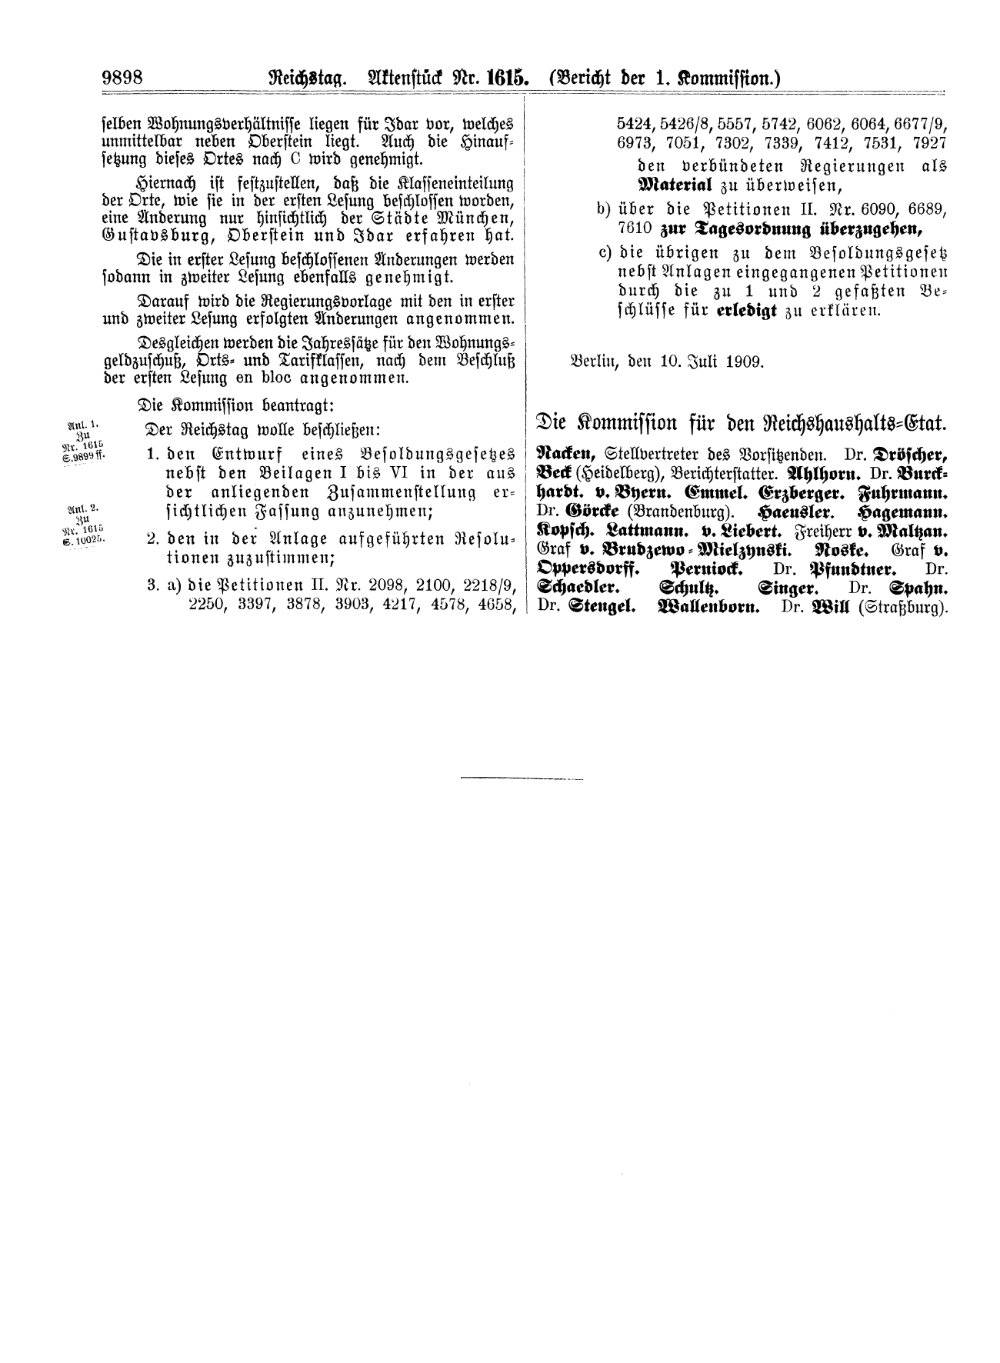 Scan of page 9898